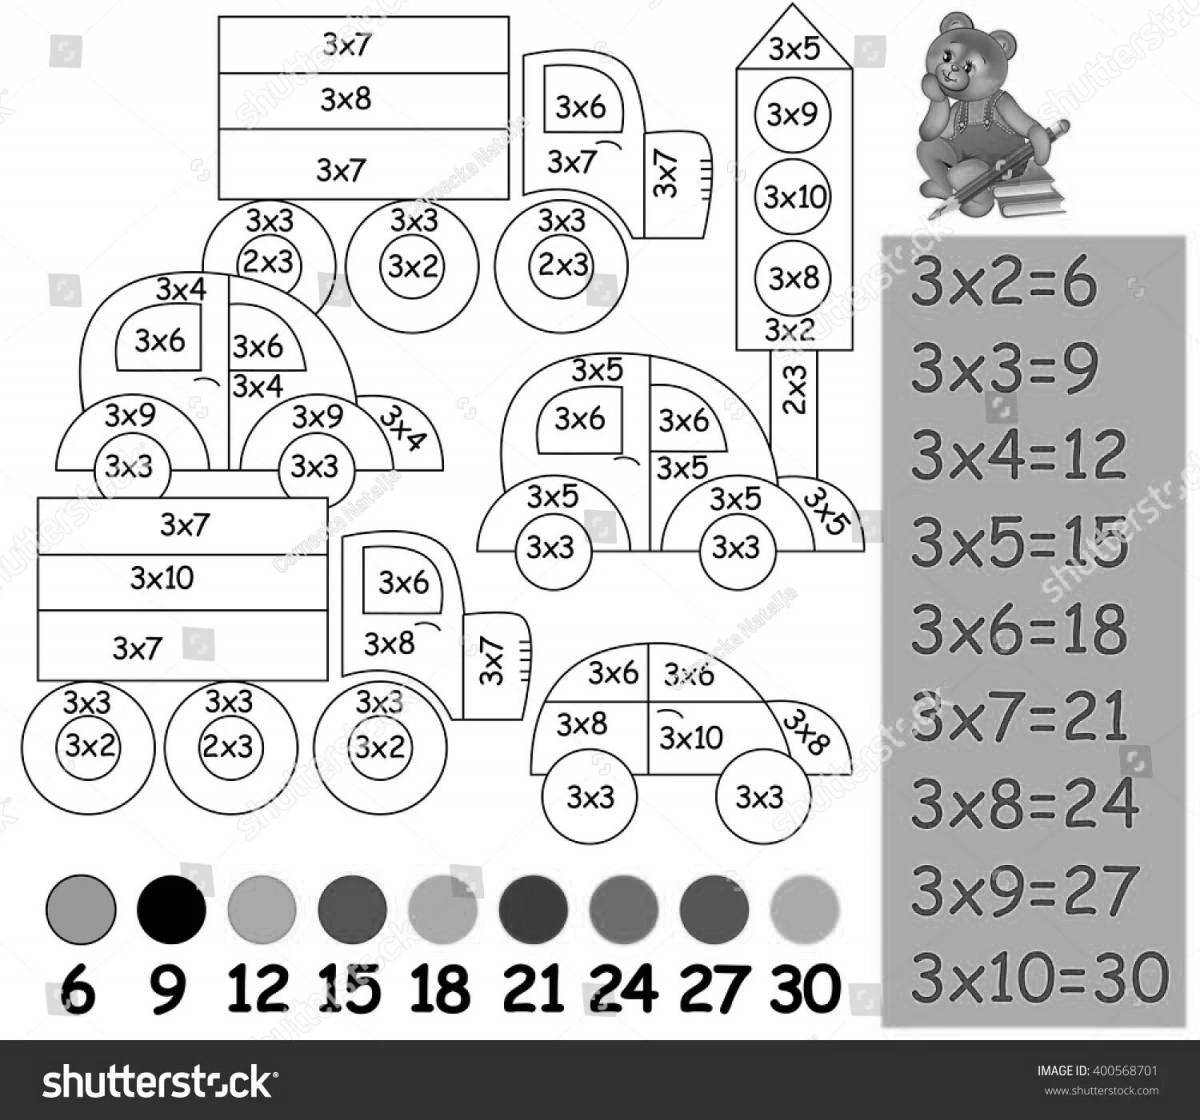 Colorful multiplication table for 7